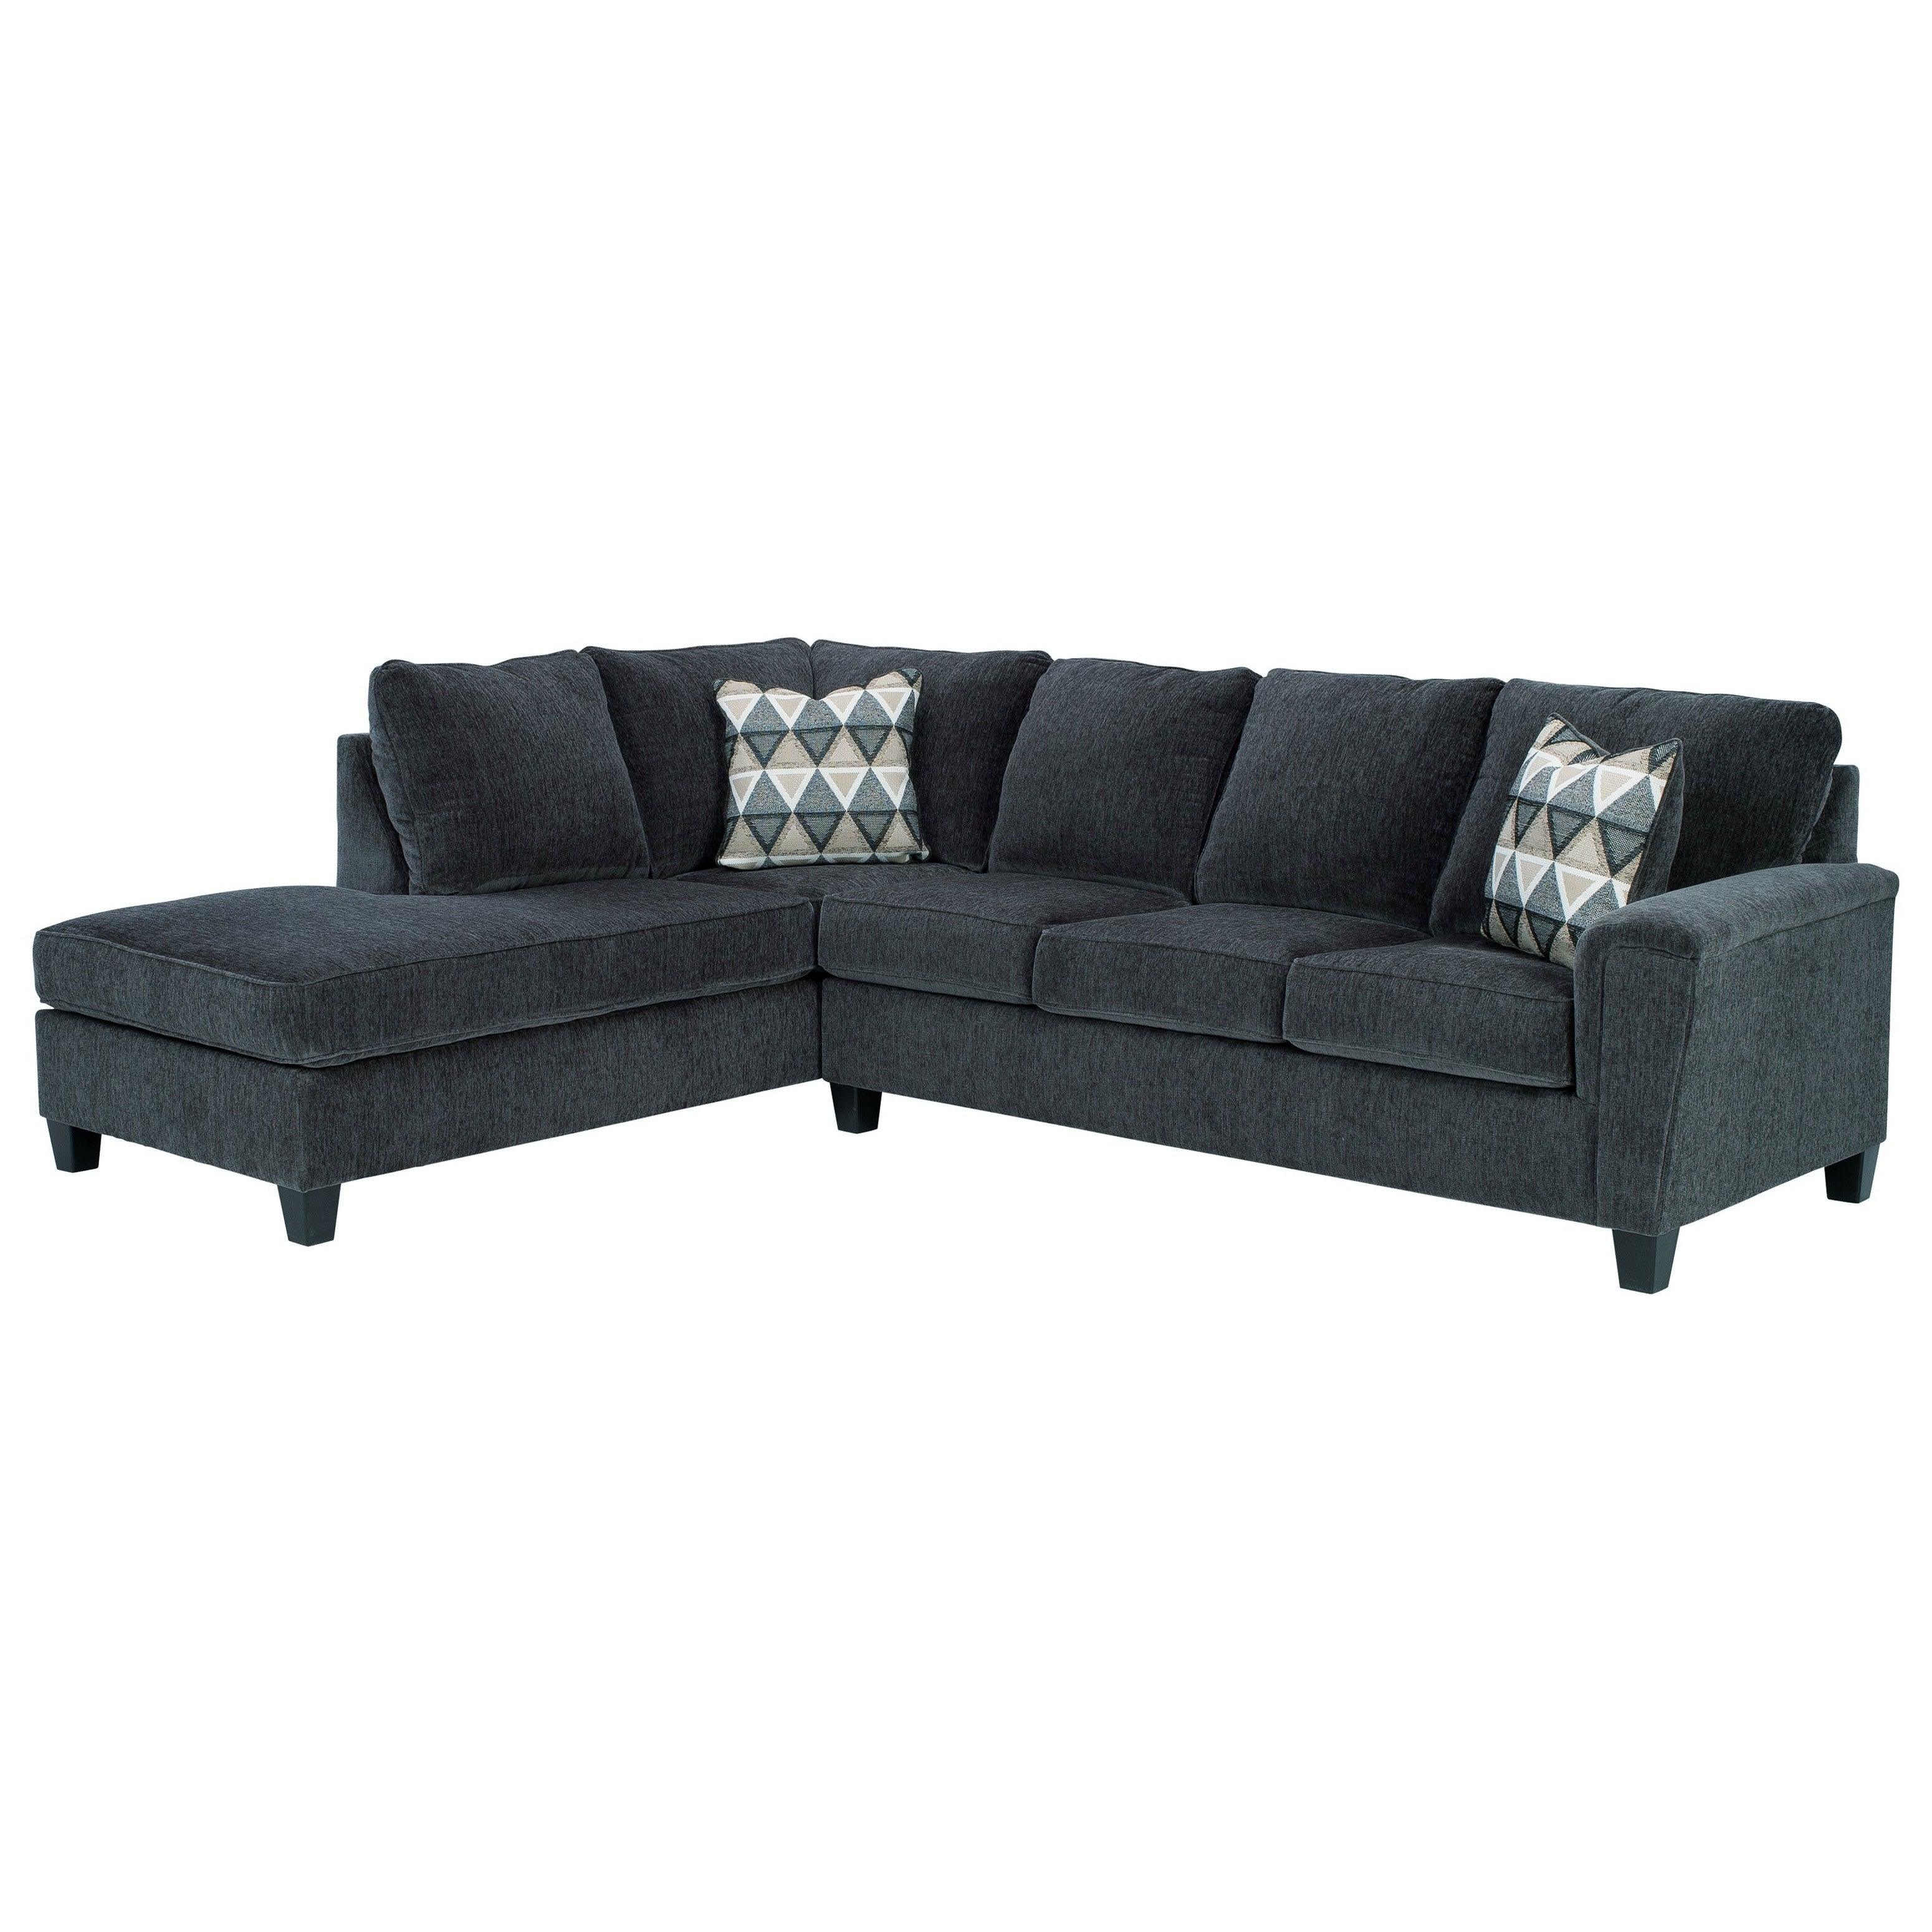 Abinger 2-Piece Sleeper Sectional with Chaise - Ash-83905S3 - Underkut